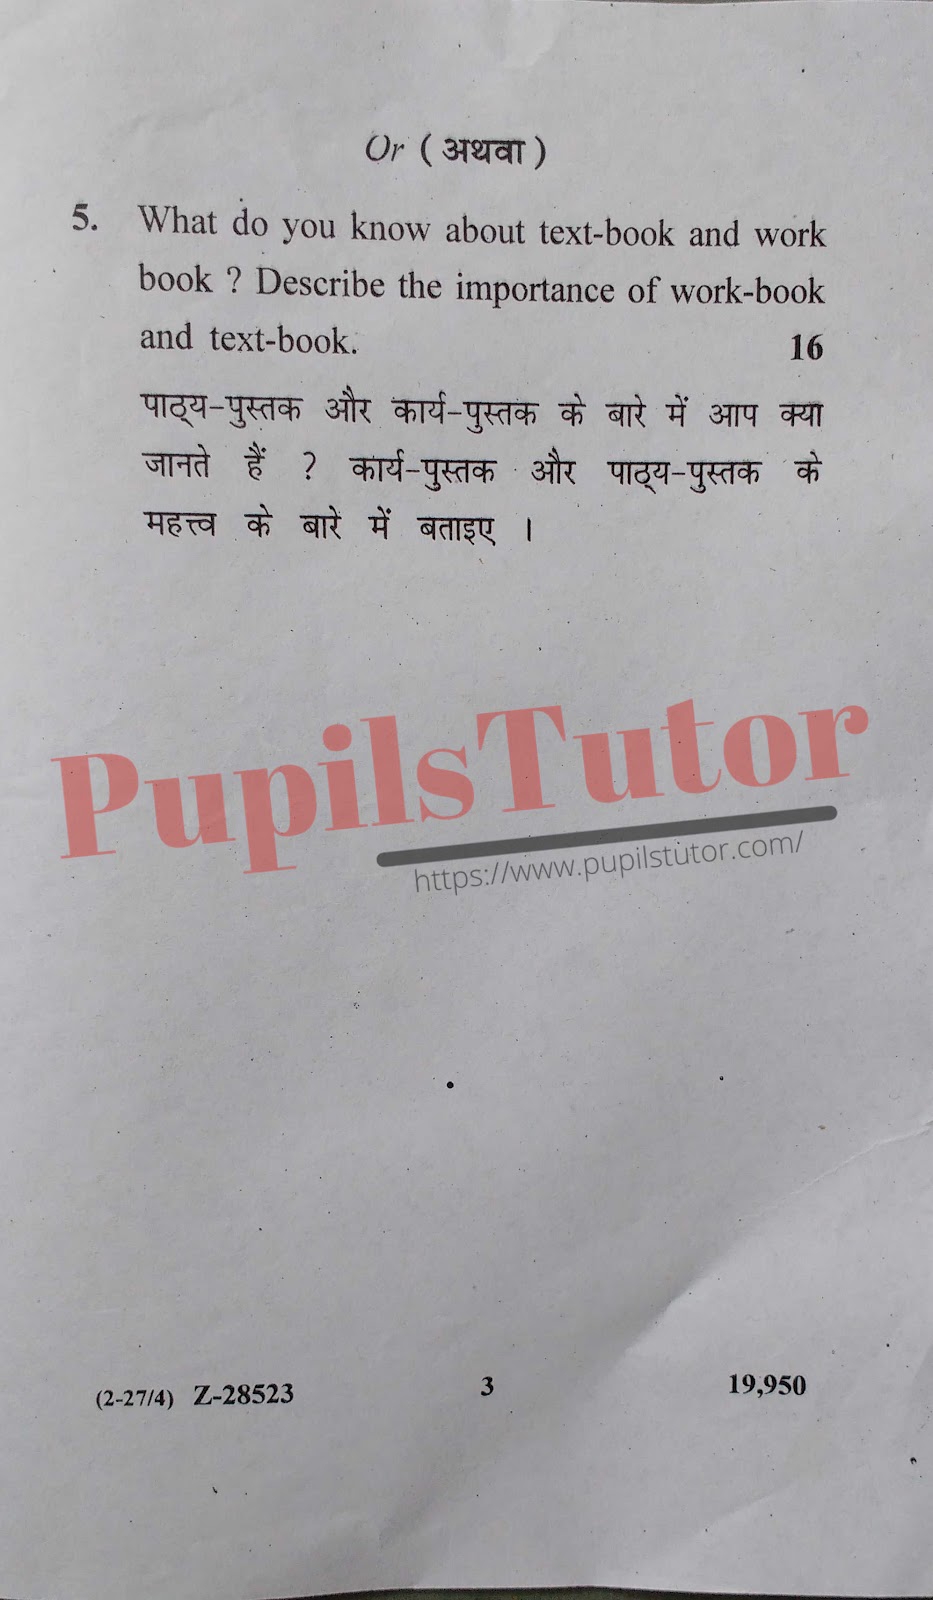 Free Download PDF Of M.D. University B.Ed Second Year Latest Question Paper For Understanding Disciplines And Subjects Subject (Page 3) - https://www.pupilstutor.com